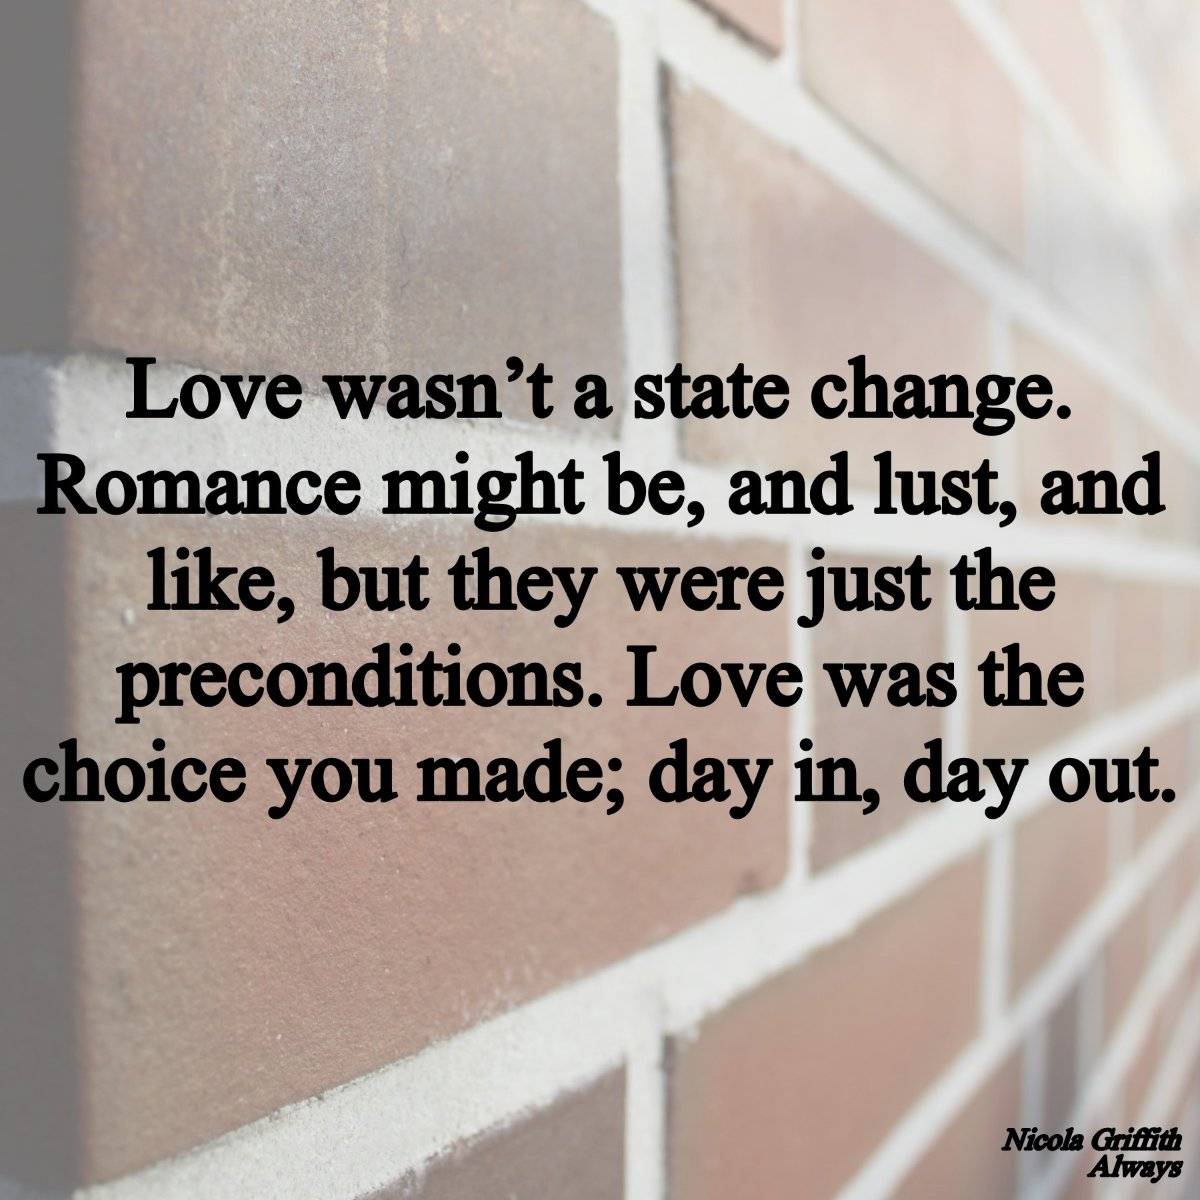 Love wasn‘t a state change. Romance might be, and lust, and like, but they were just the preconditions. Love was the choice you made; day in, day out. From Always by Nicola Griffith